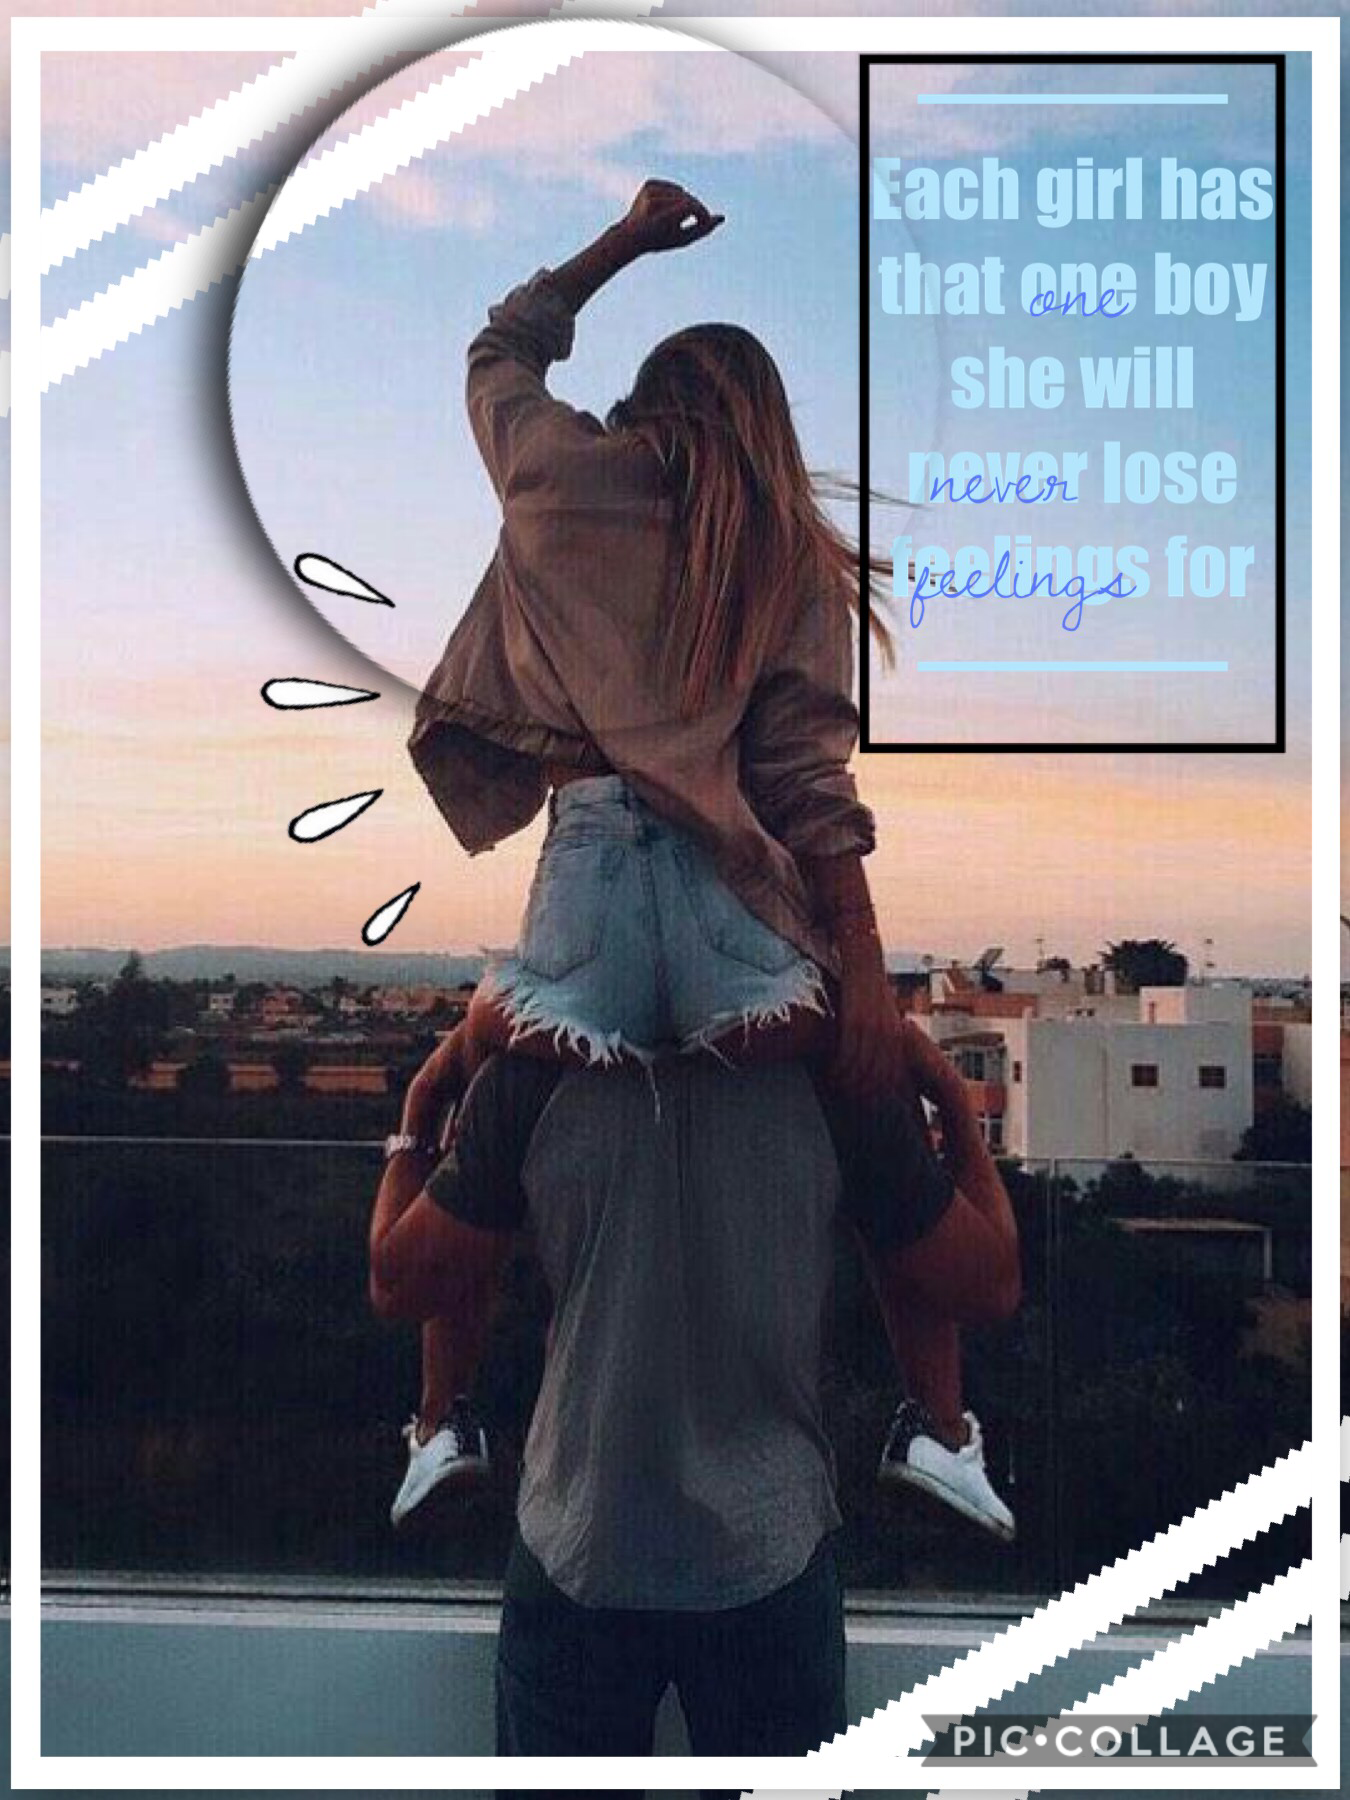 💝TaPpP💝


The quote is honestly so relatable😂 it’s so true!!!😂 sorry if the edit looks bad I was rushing it... which I probably shouldn’t of😅😂 have a great day!